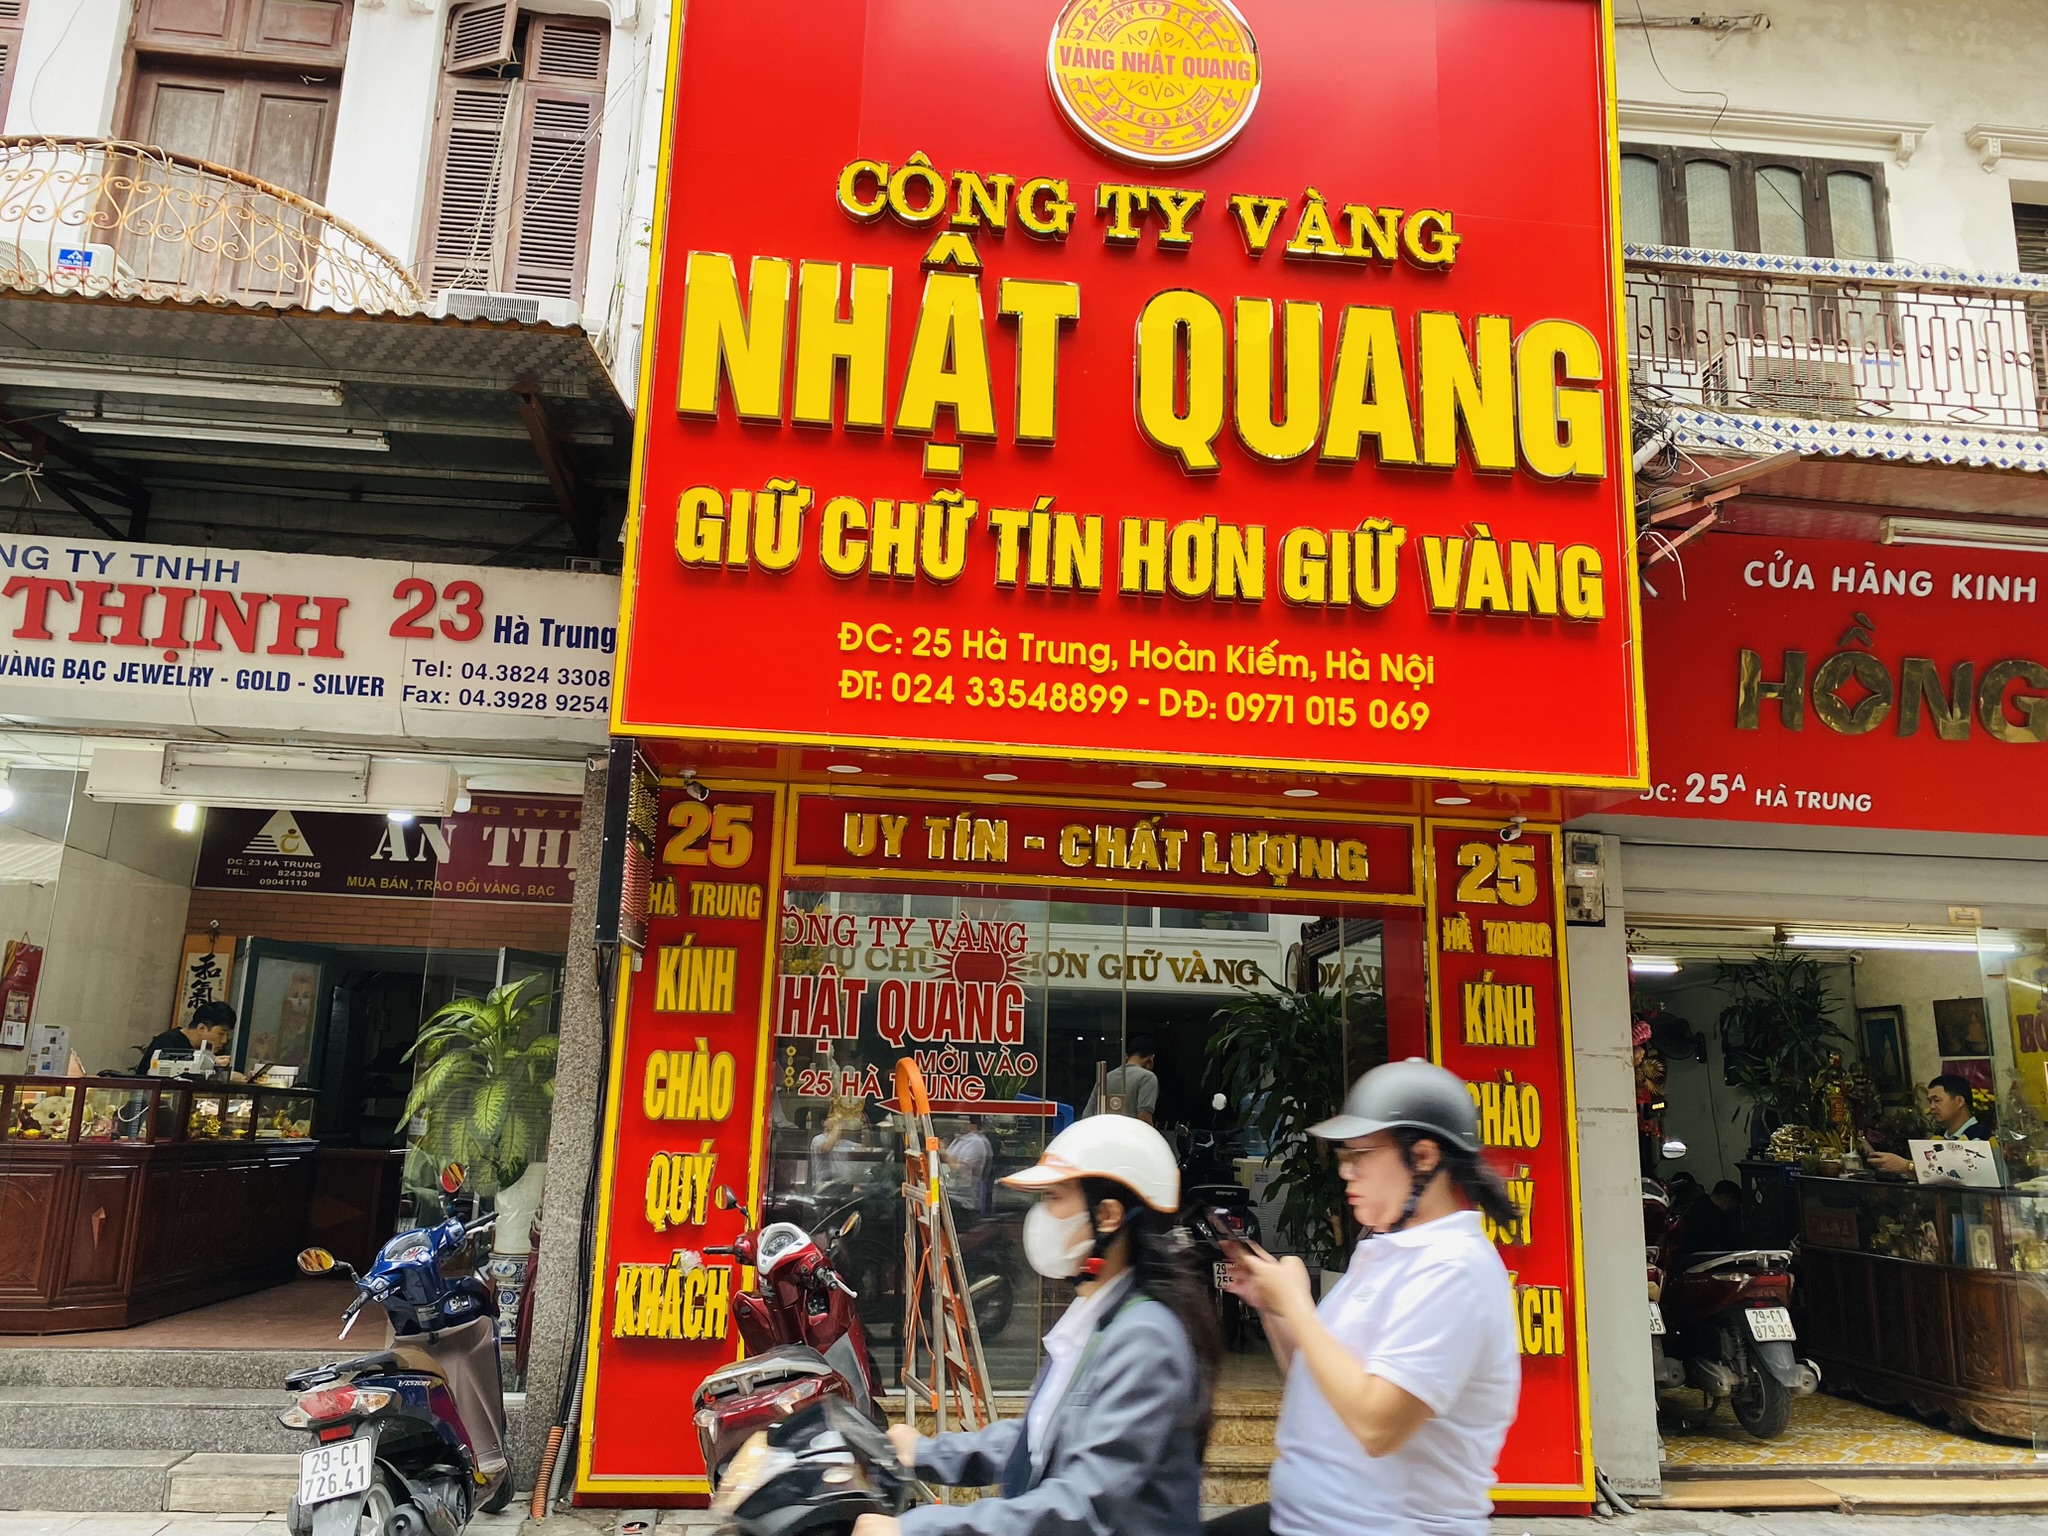 Ha Trung Street The Best Places to Exchange Money in Hanoi